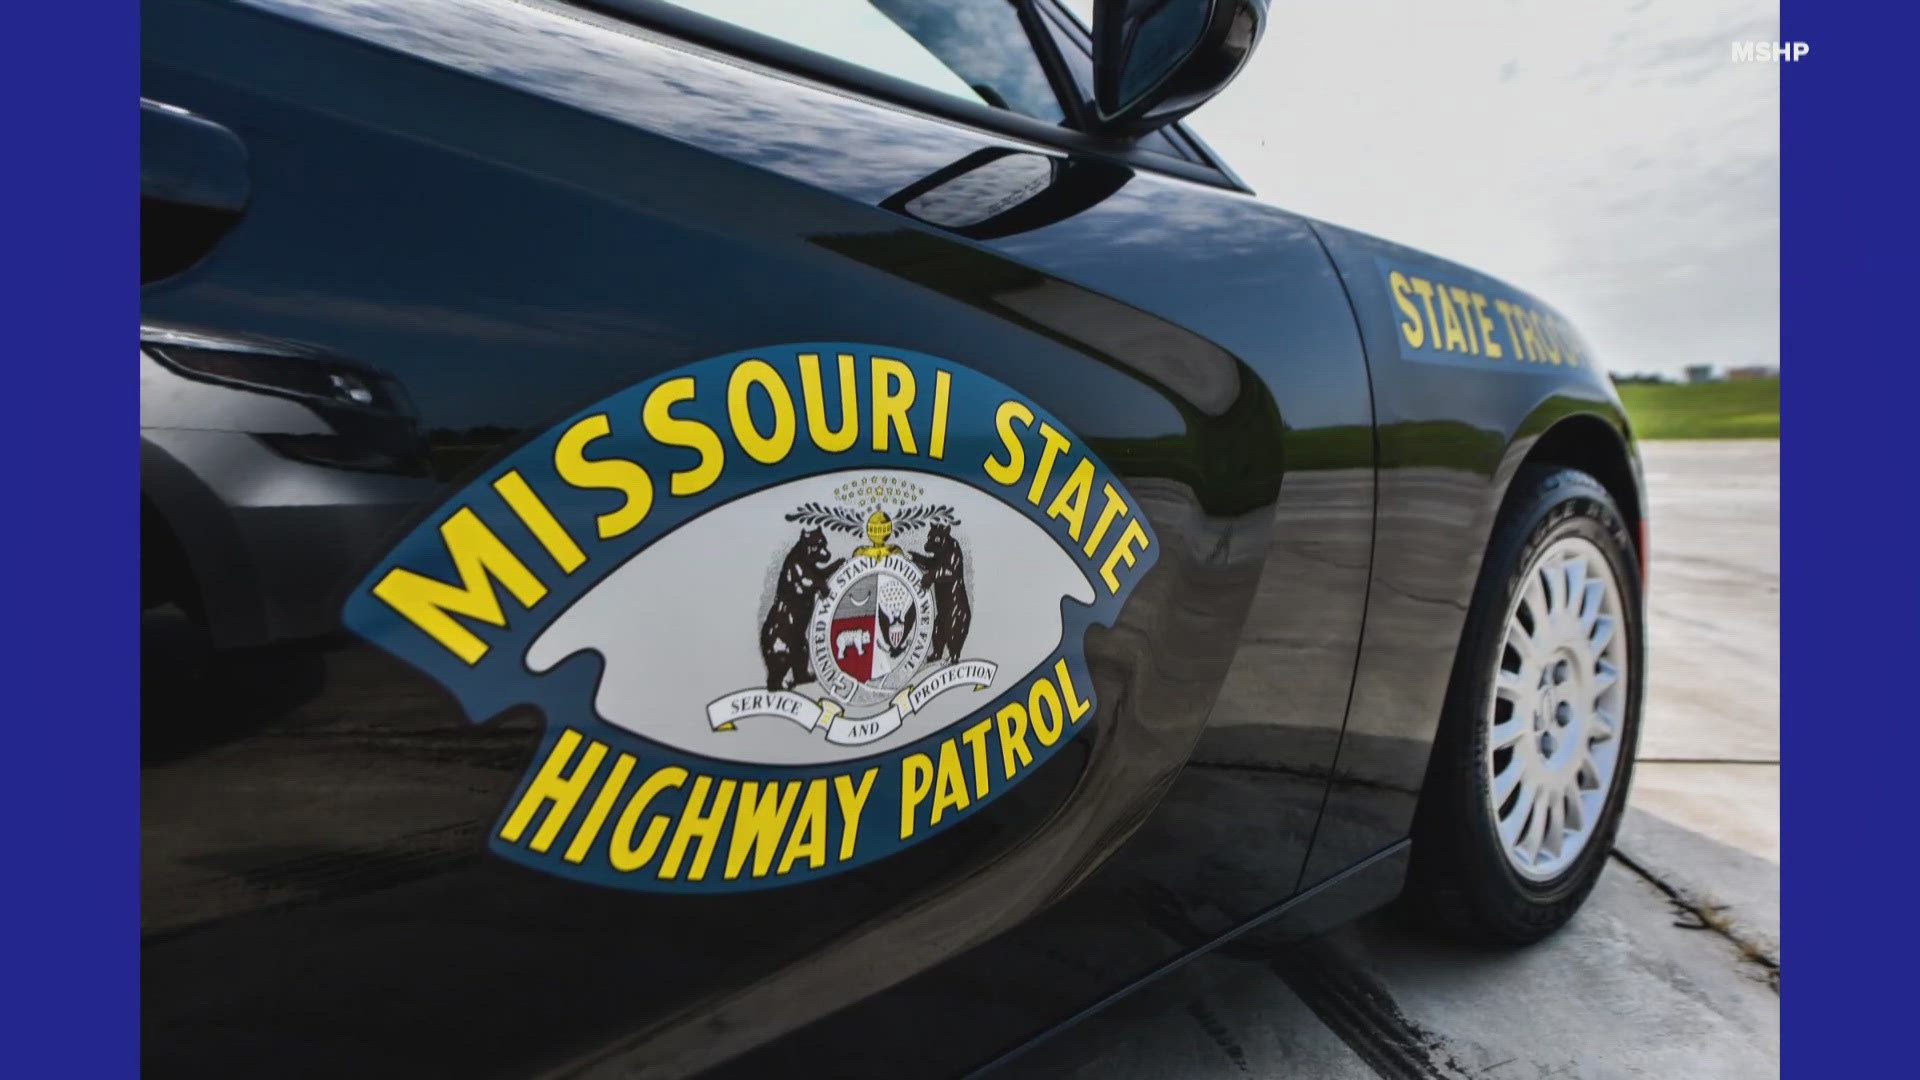 If you get into a minor crash on the highway or get pulled over by police, here are some tips to keep you safe.